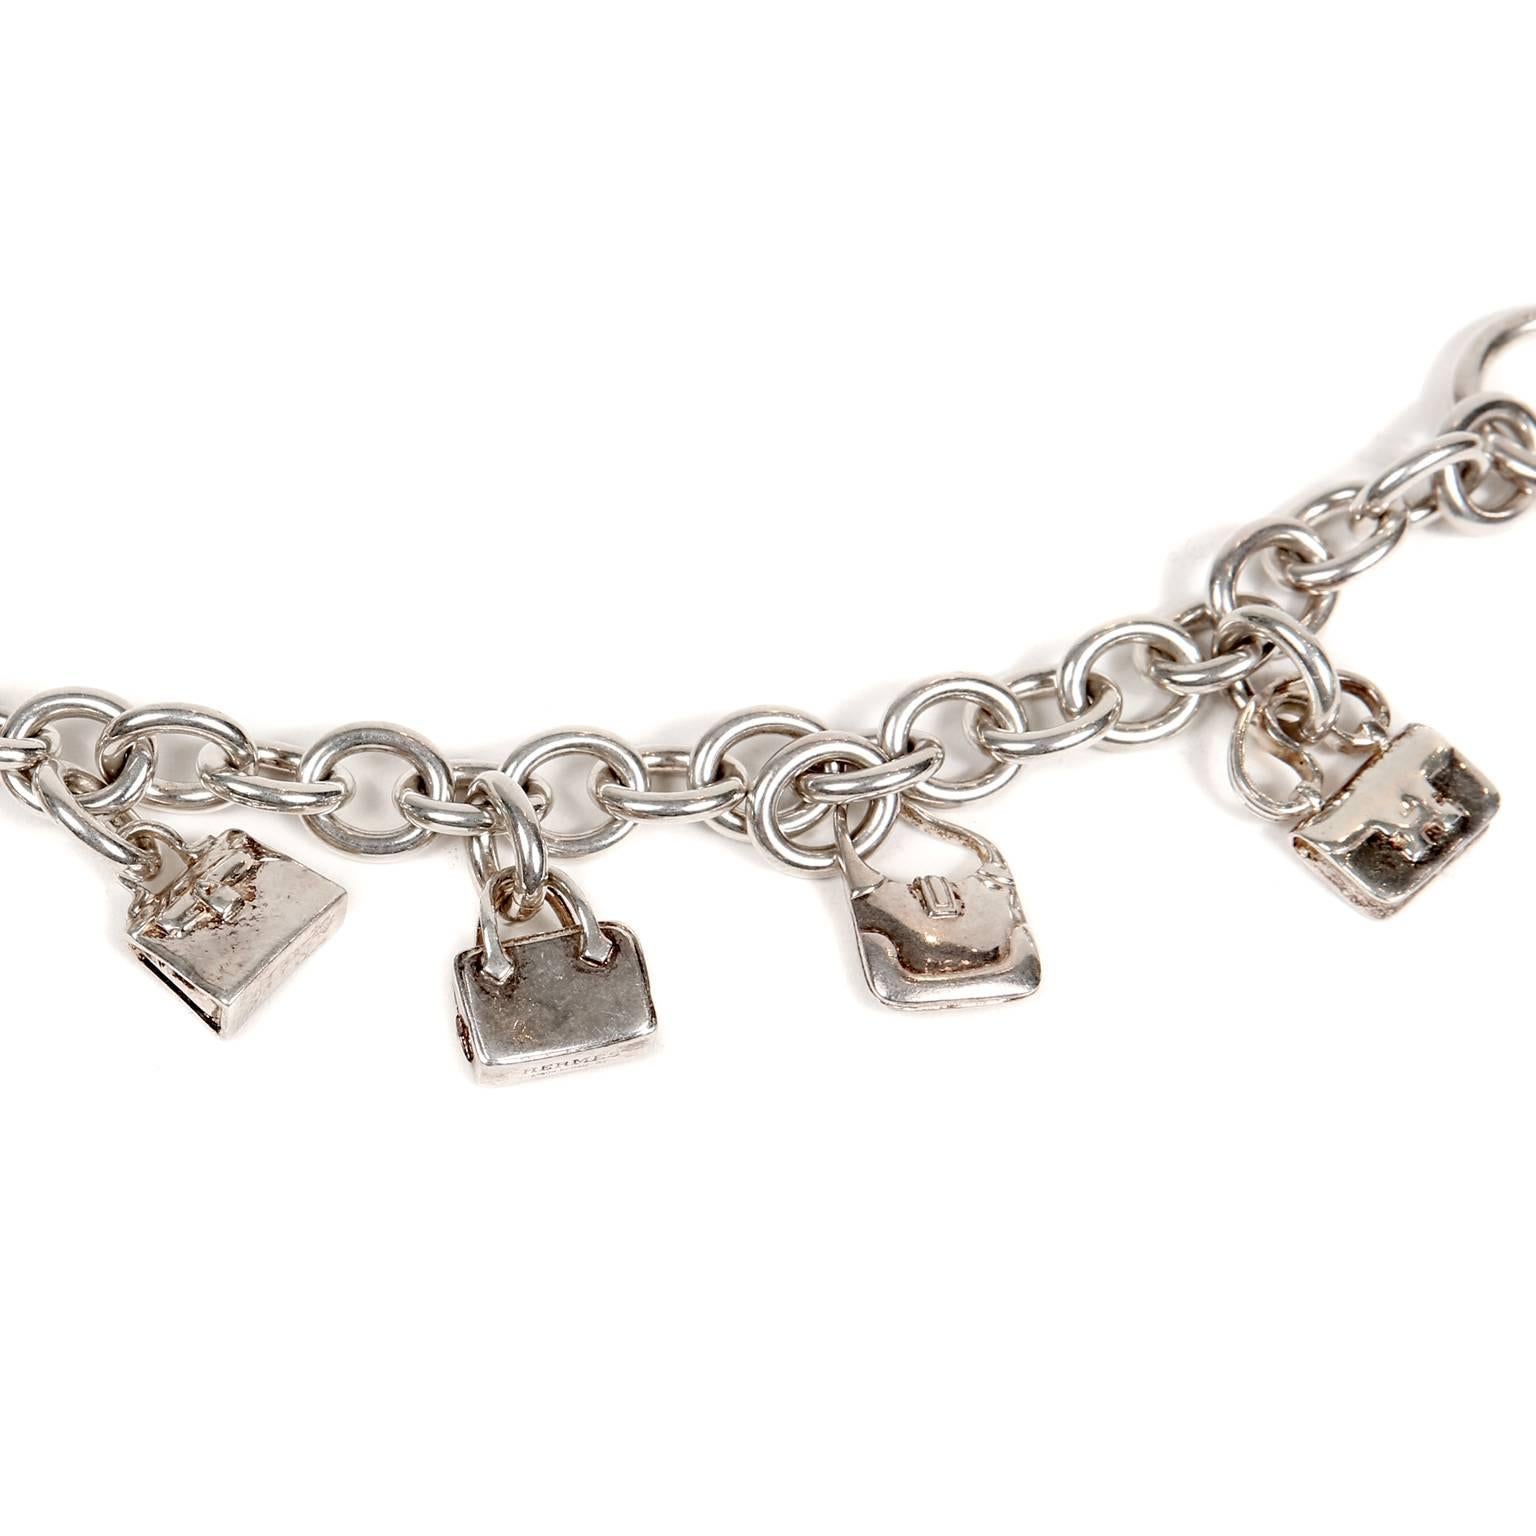 Hermès Sterling Silver Bags Charm Bracelet In New Condition For Sale In Malibu, CA